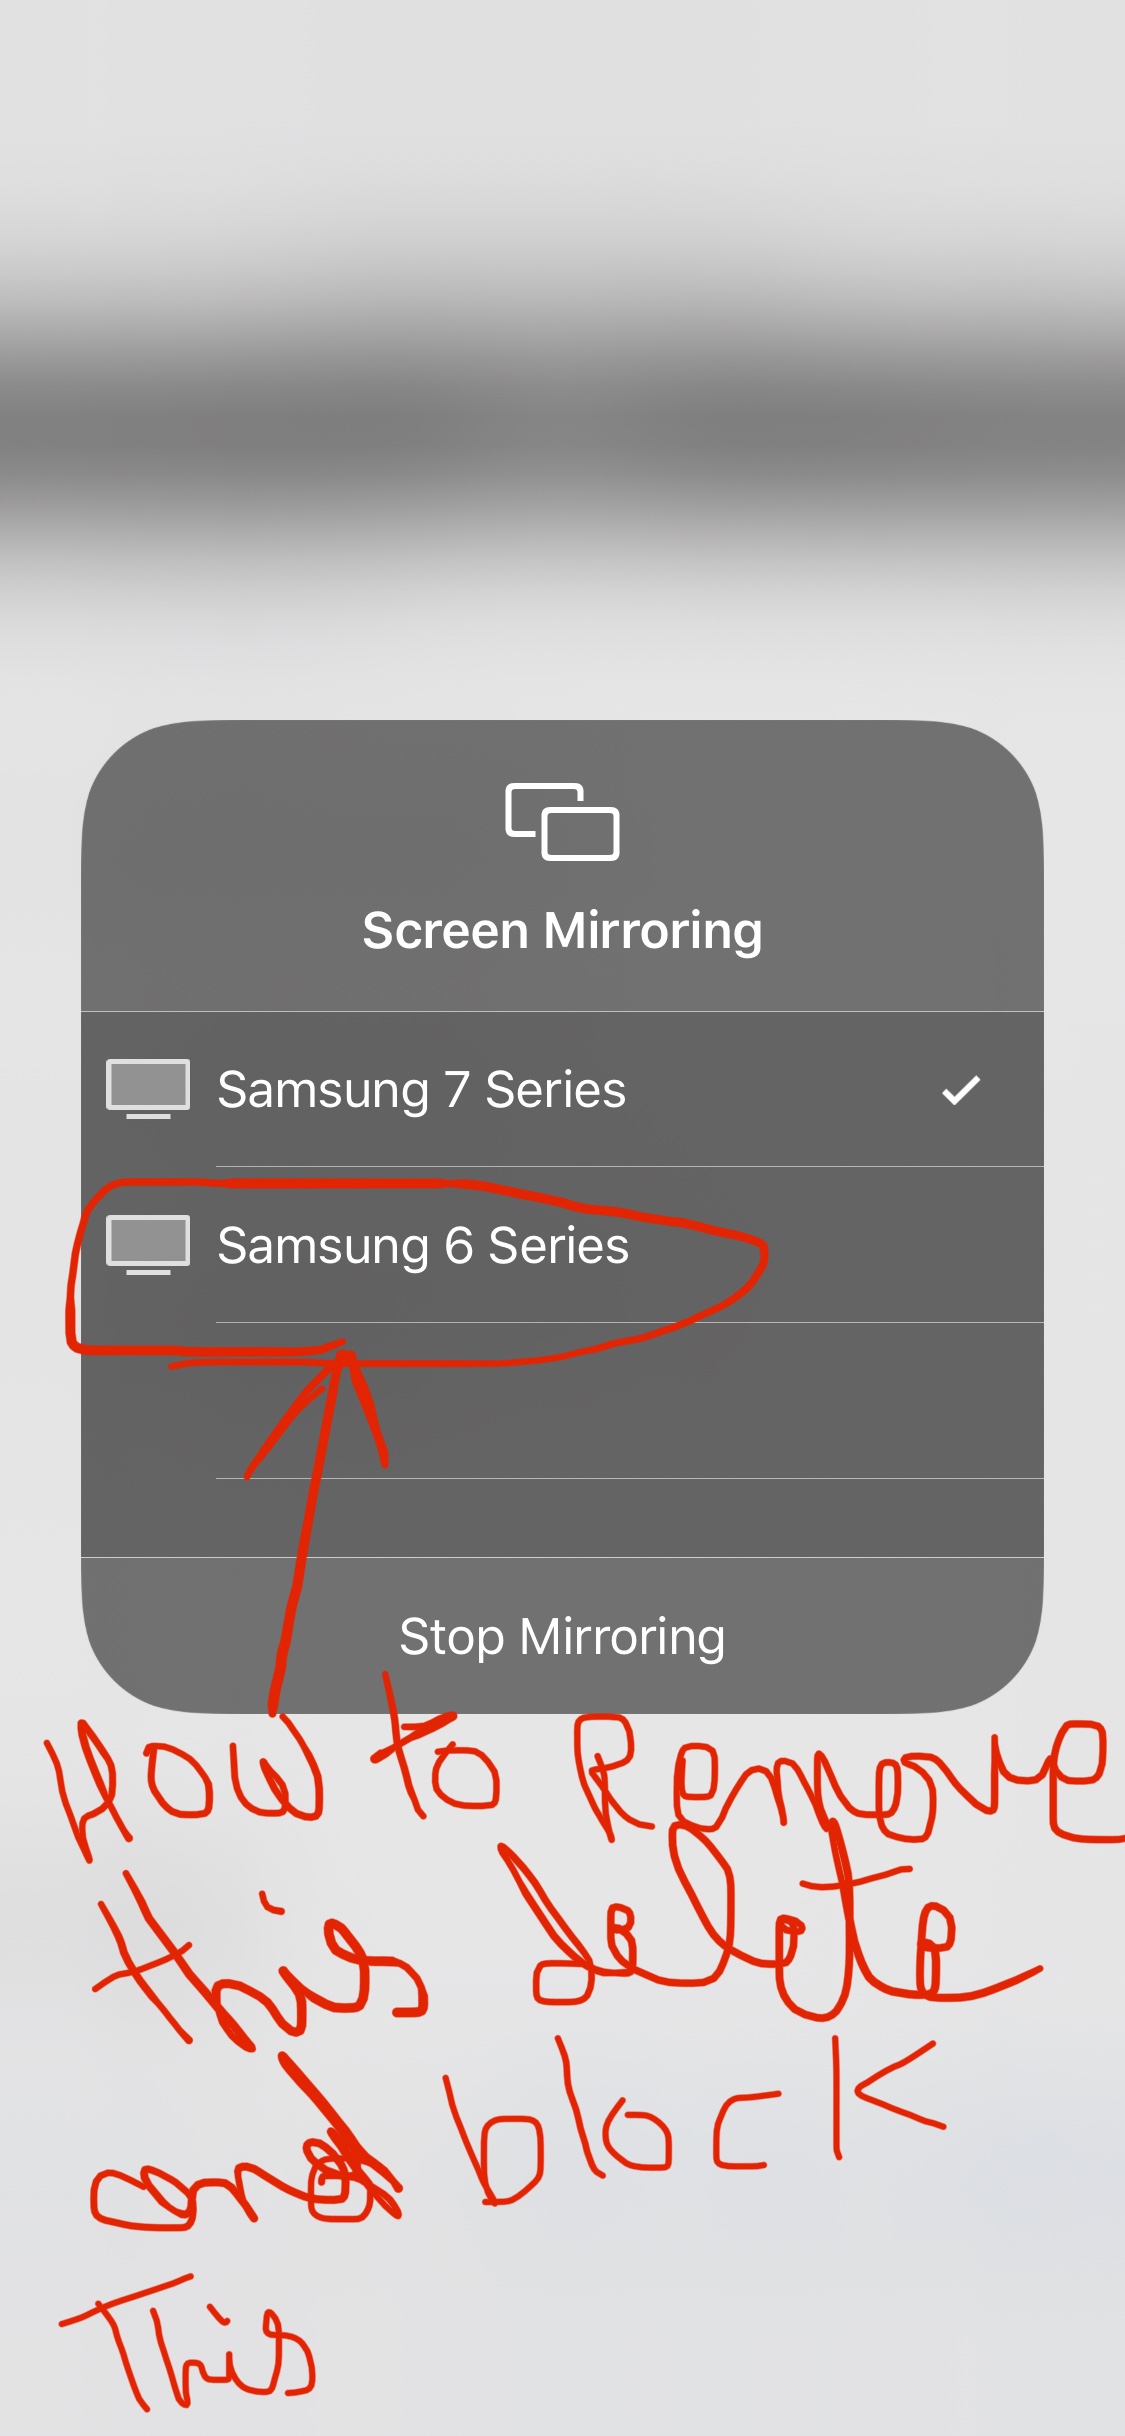 How To Remove Samsung Tv From Iphone, How Do I Get My Iphone To Mirror On Samsung Tv